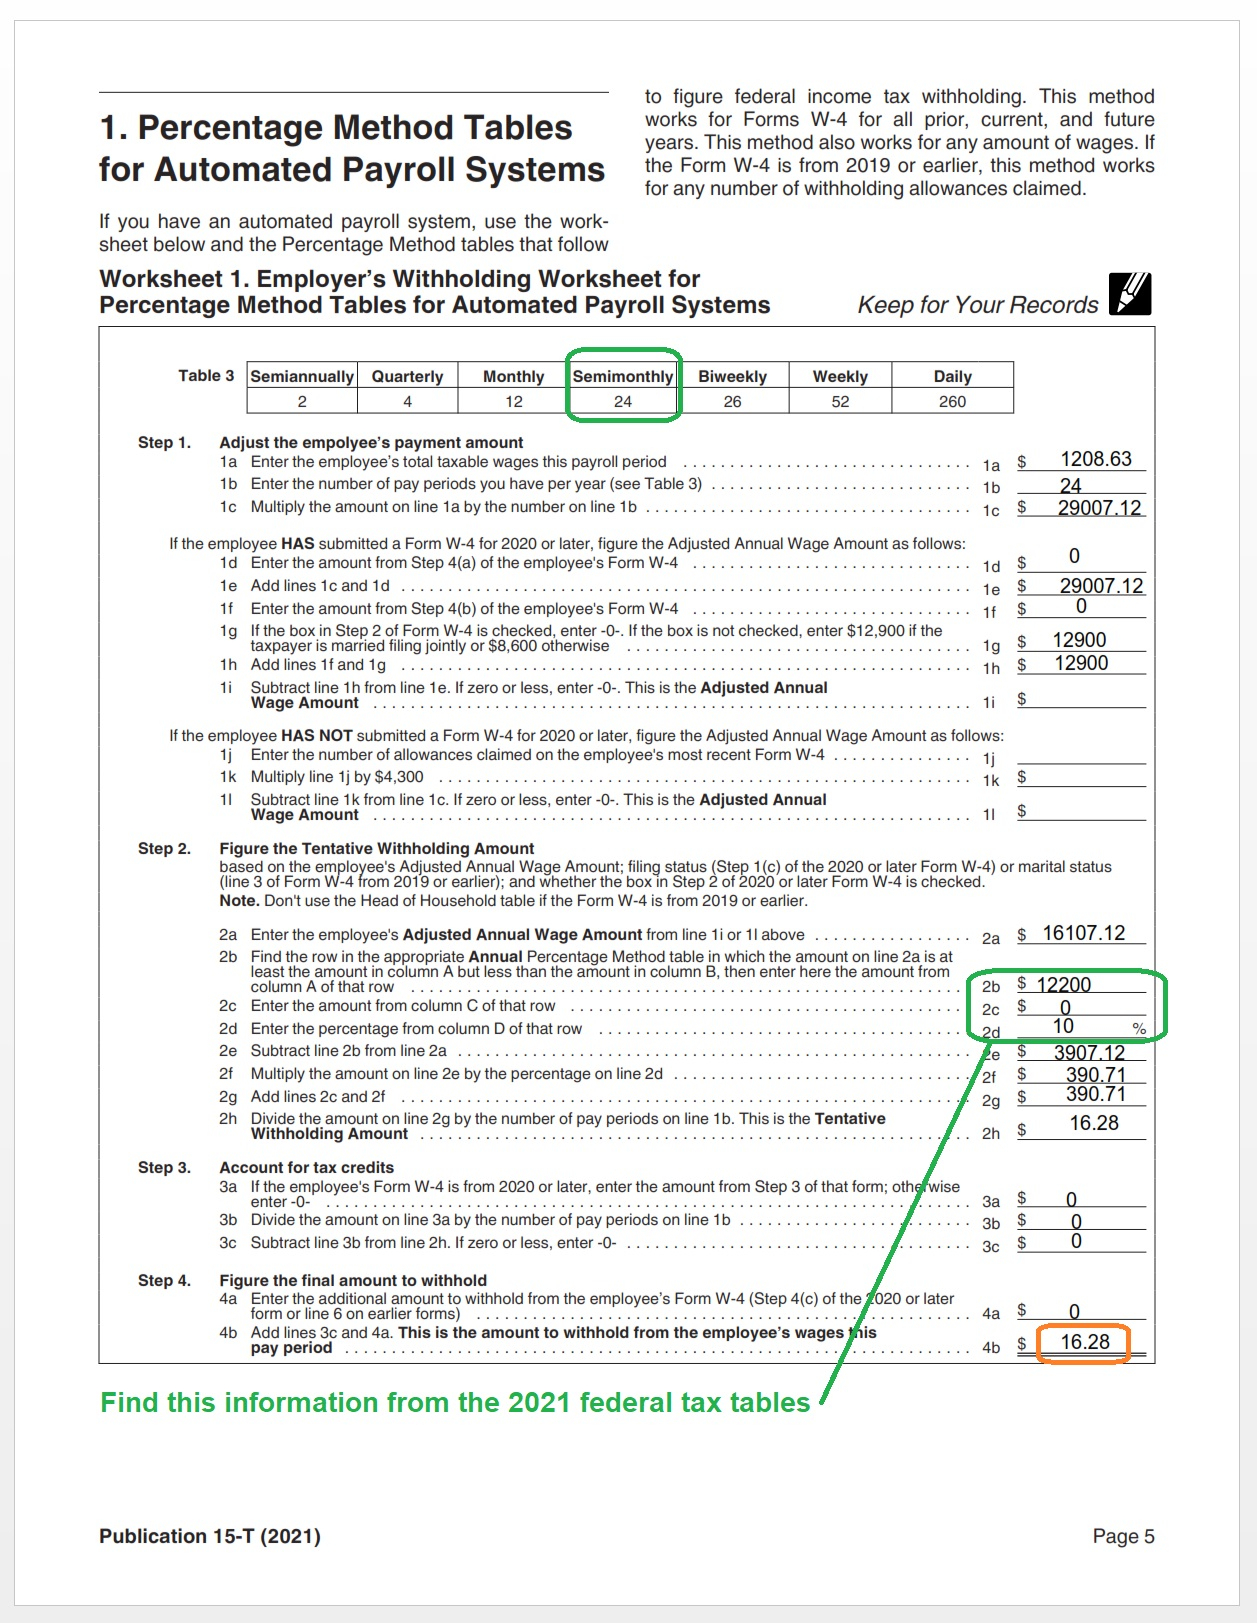 How To Calculate 2021 Federal Income Withhold Manually 